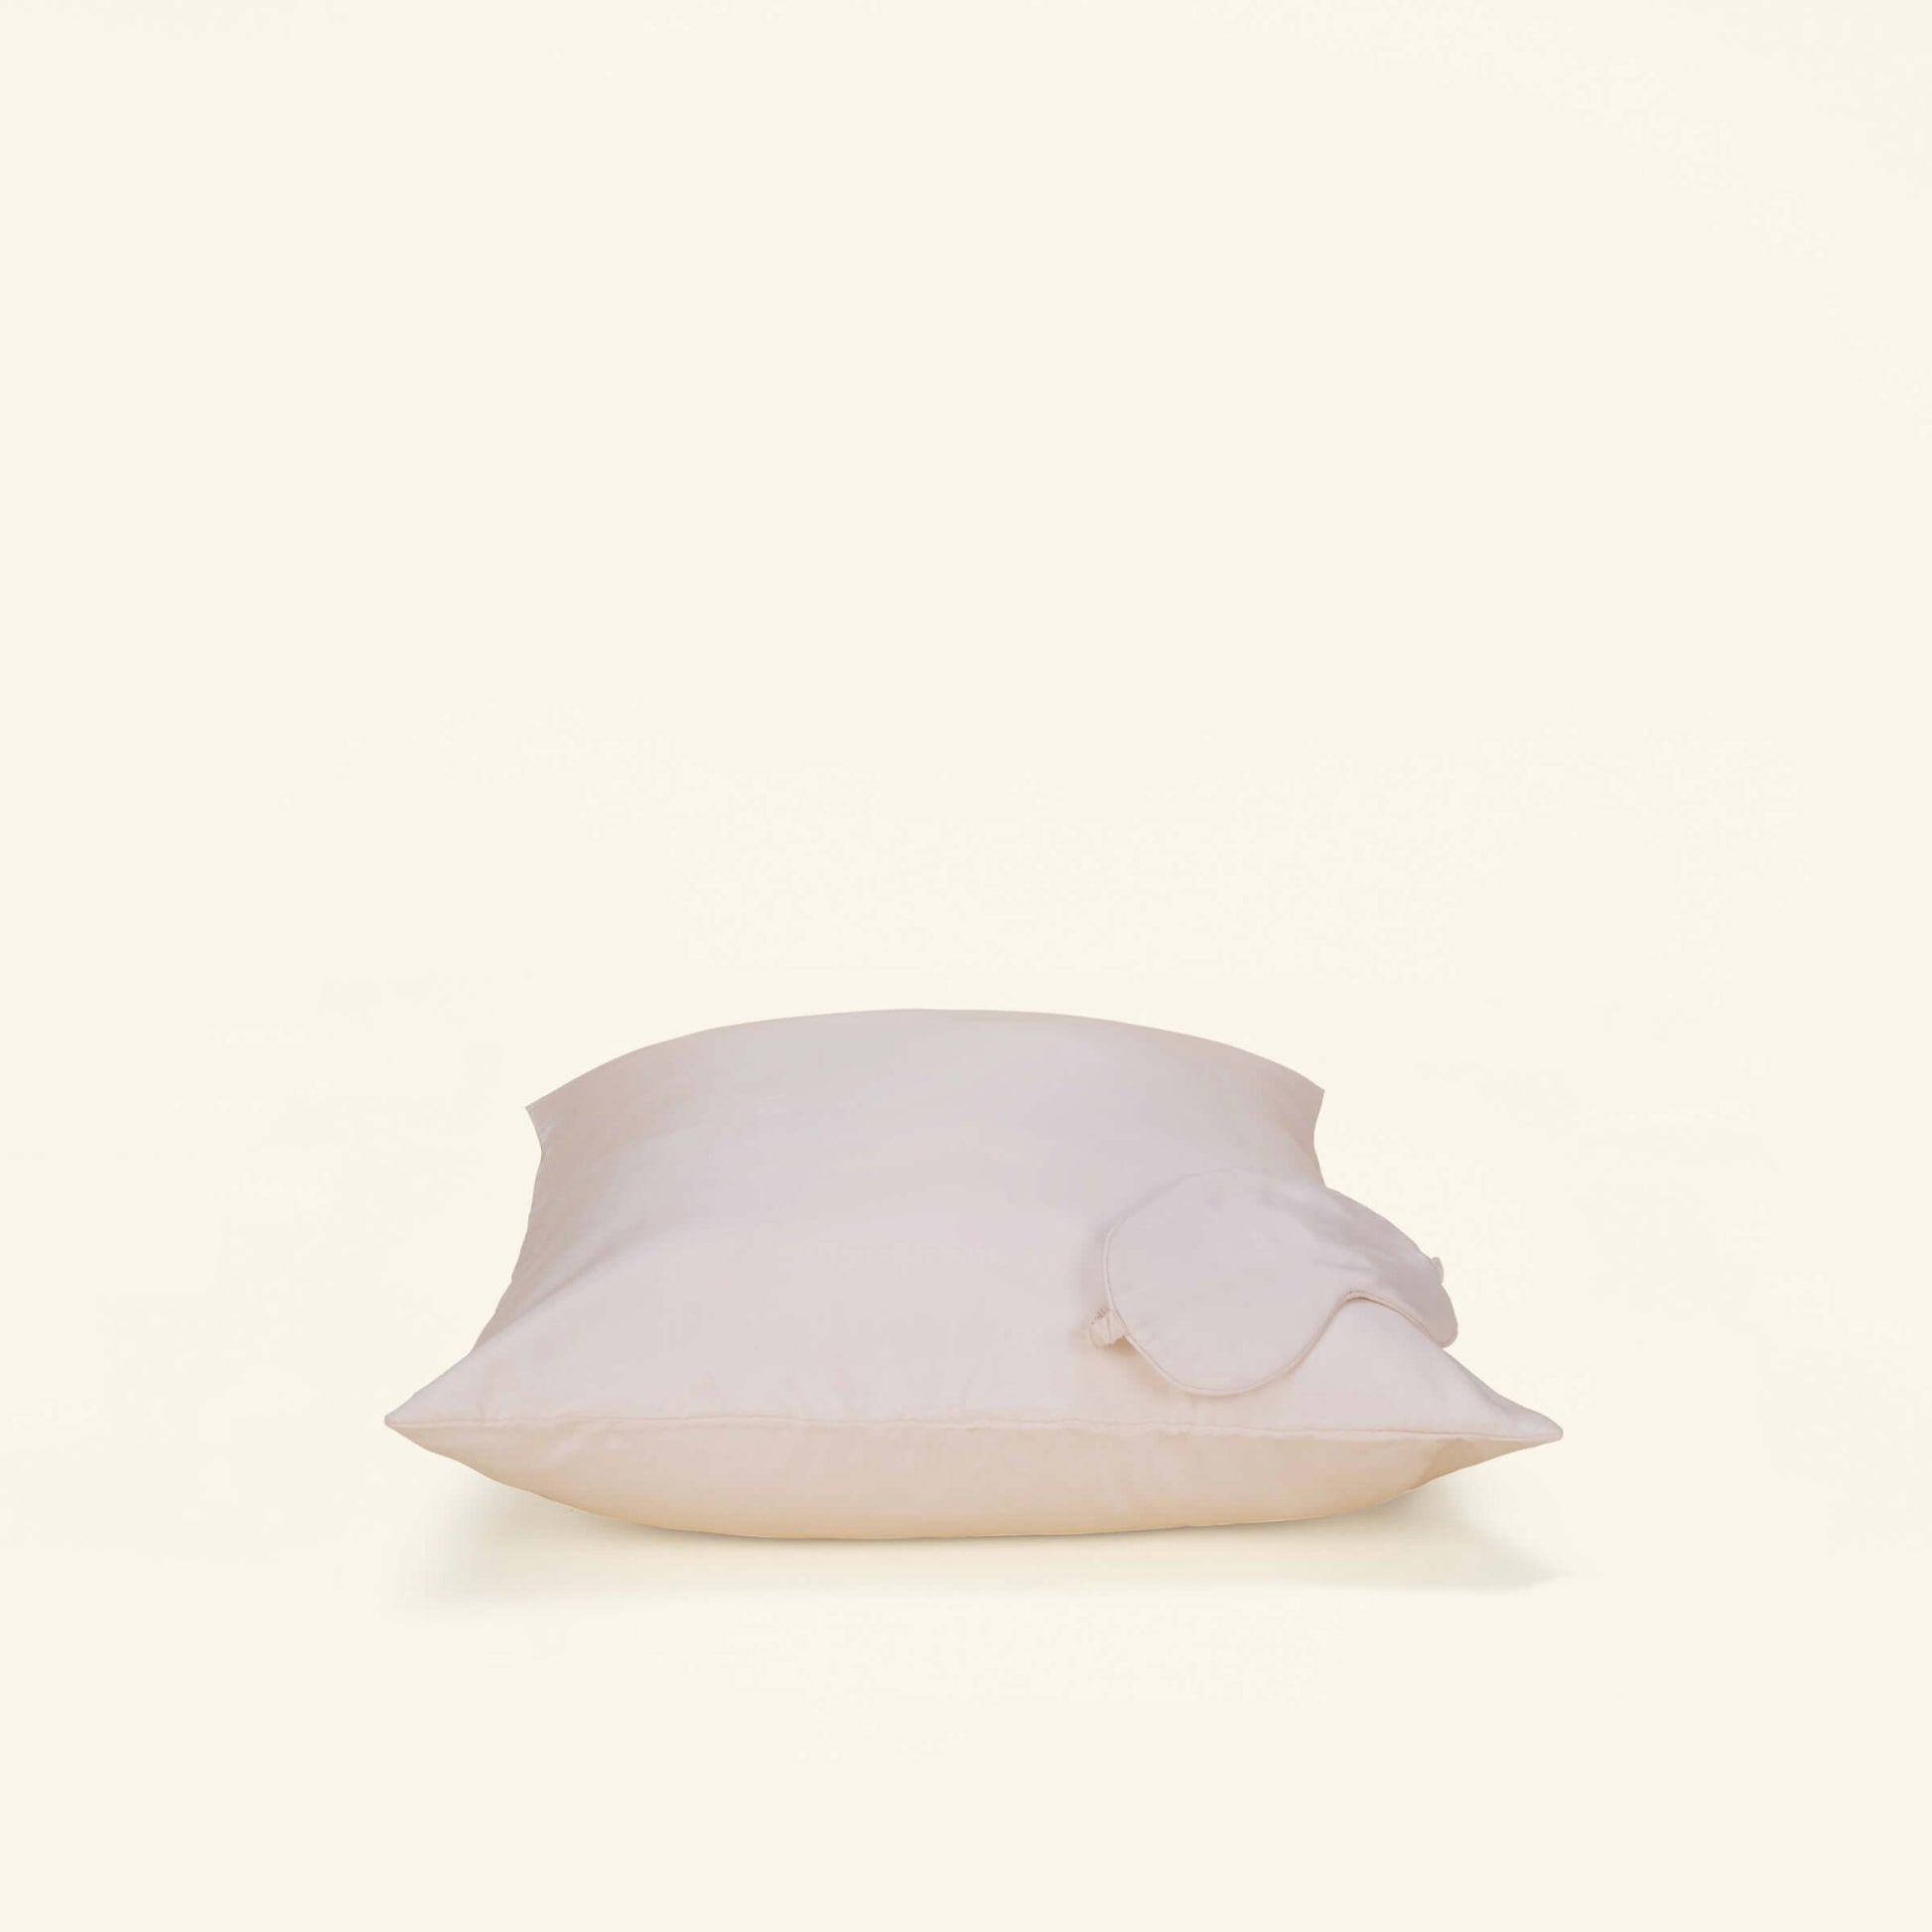 The Slumber Cloud Silk Pillowcase and Sleep Mask made with temperature regulation technology